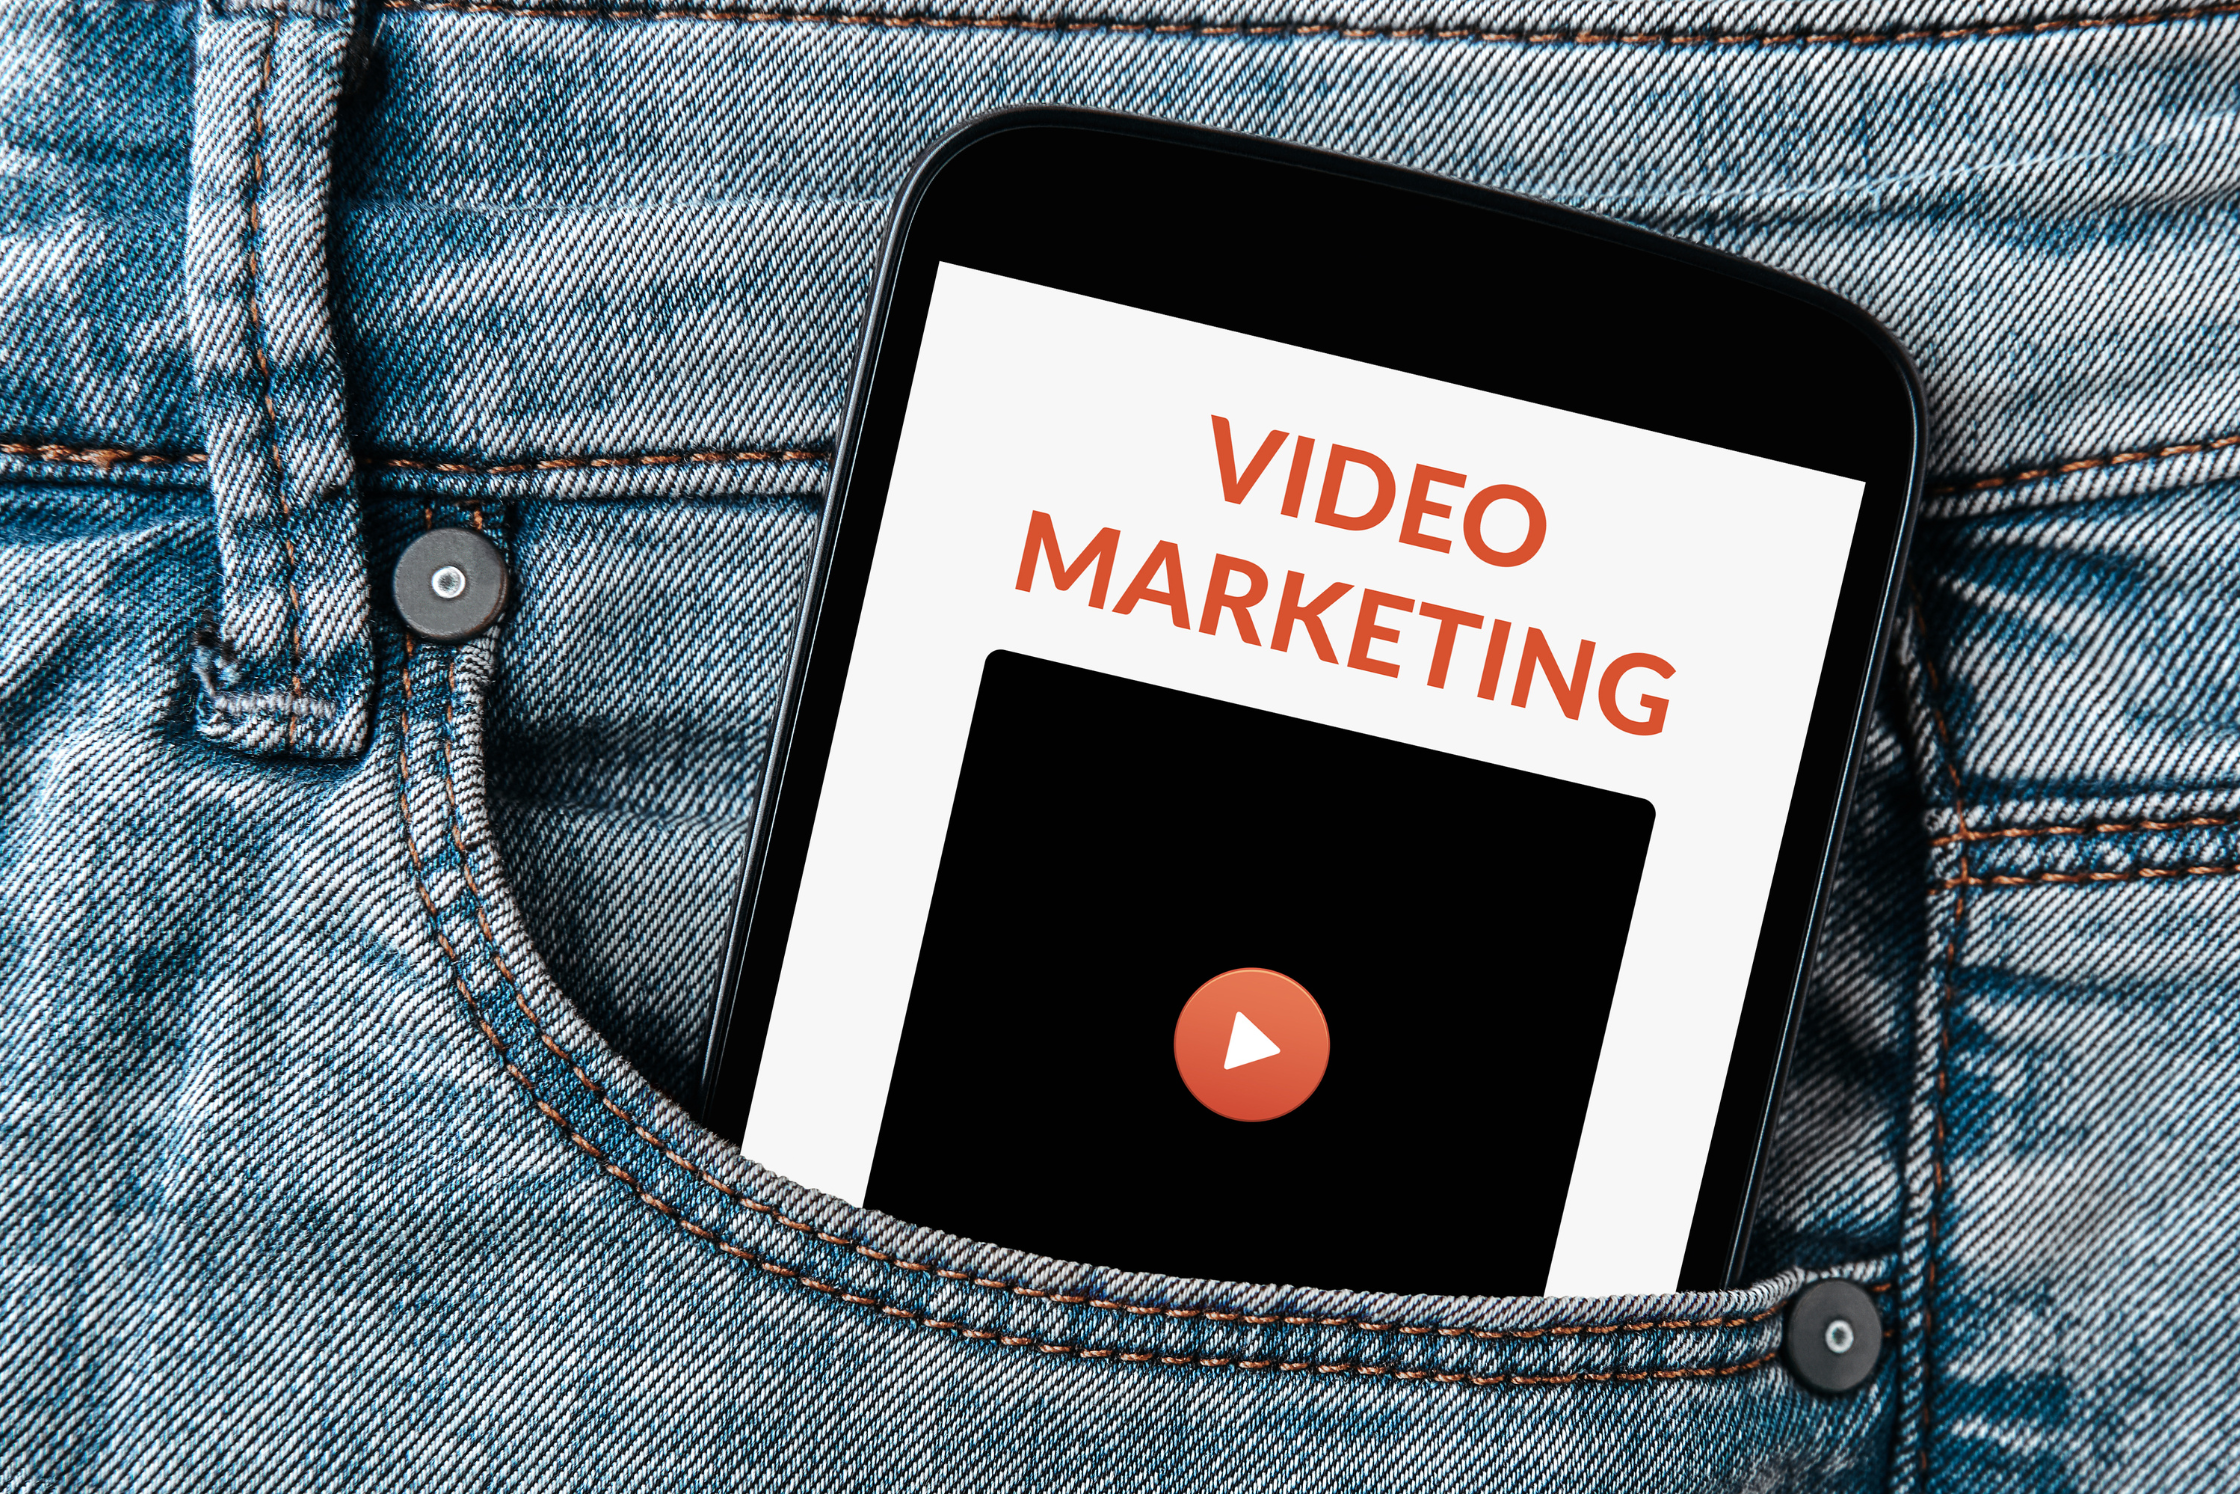 How Video Marketing Can Attract A New Client